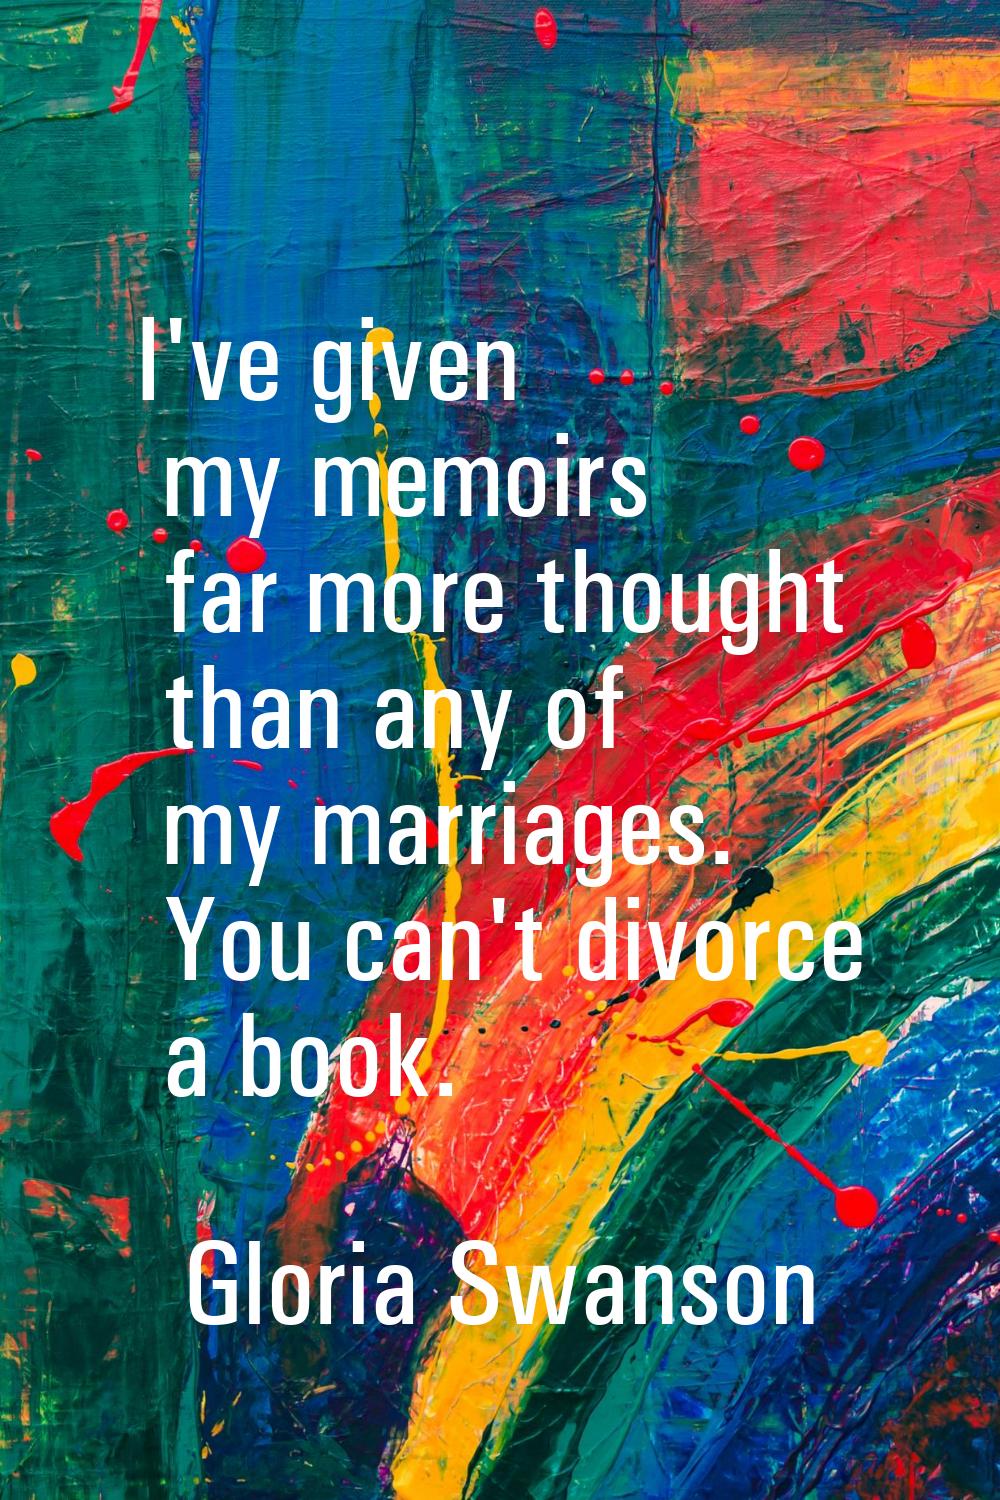 I've given my memoirs far more thought than any of my marriages. You can't divorce a book.